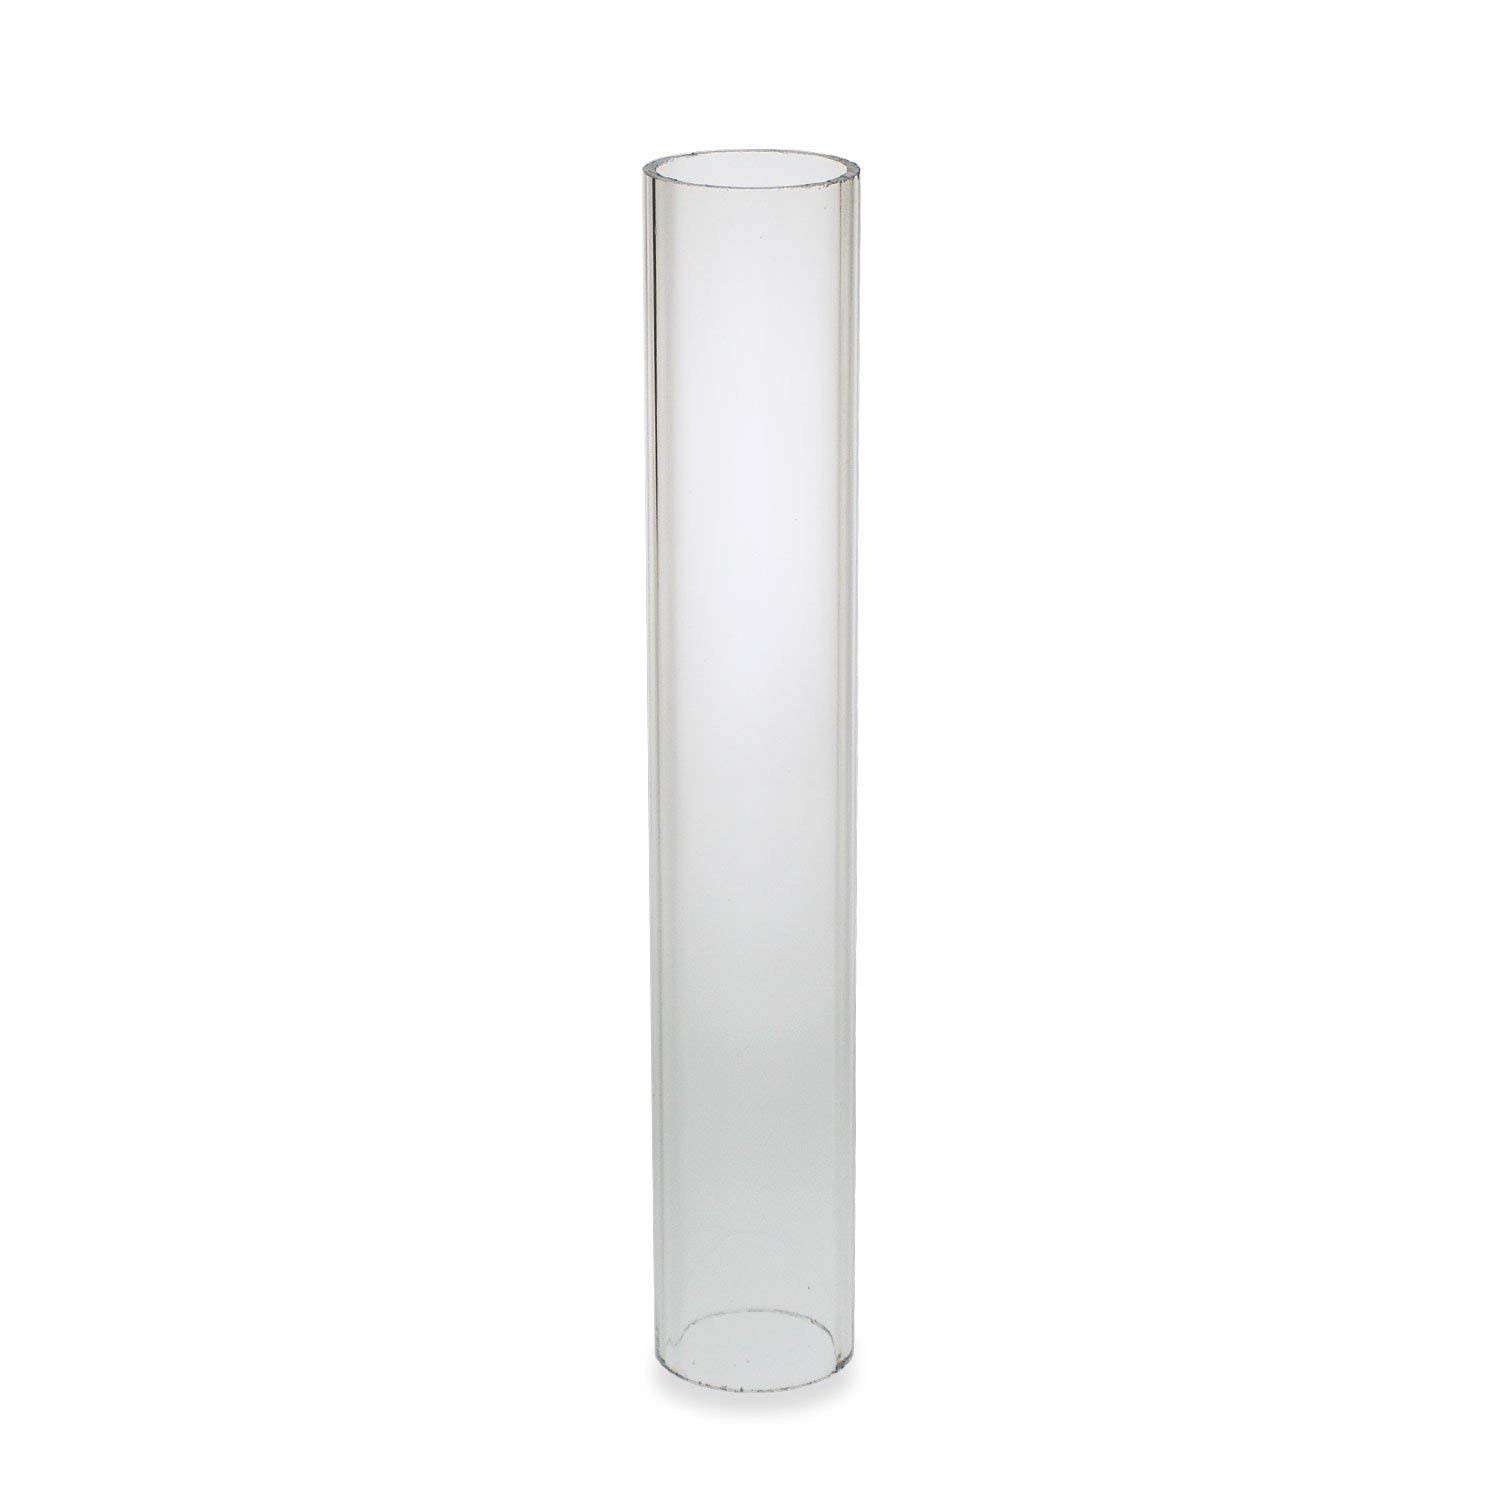 18 Wonderful 36 Inch Tall Glass Vase 2024 free download 36 inch tall glass vase of amazon com source one deluxe clear acrylic tube 2 inches thick 12 throughout amazon com source one deluxe clear acrylic tube 2 inches thick 12 inch 2 inch wide off